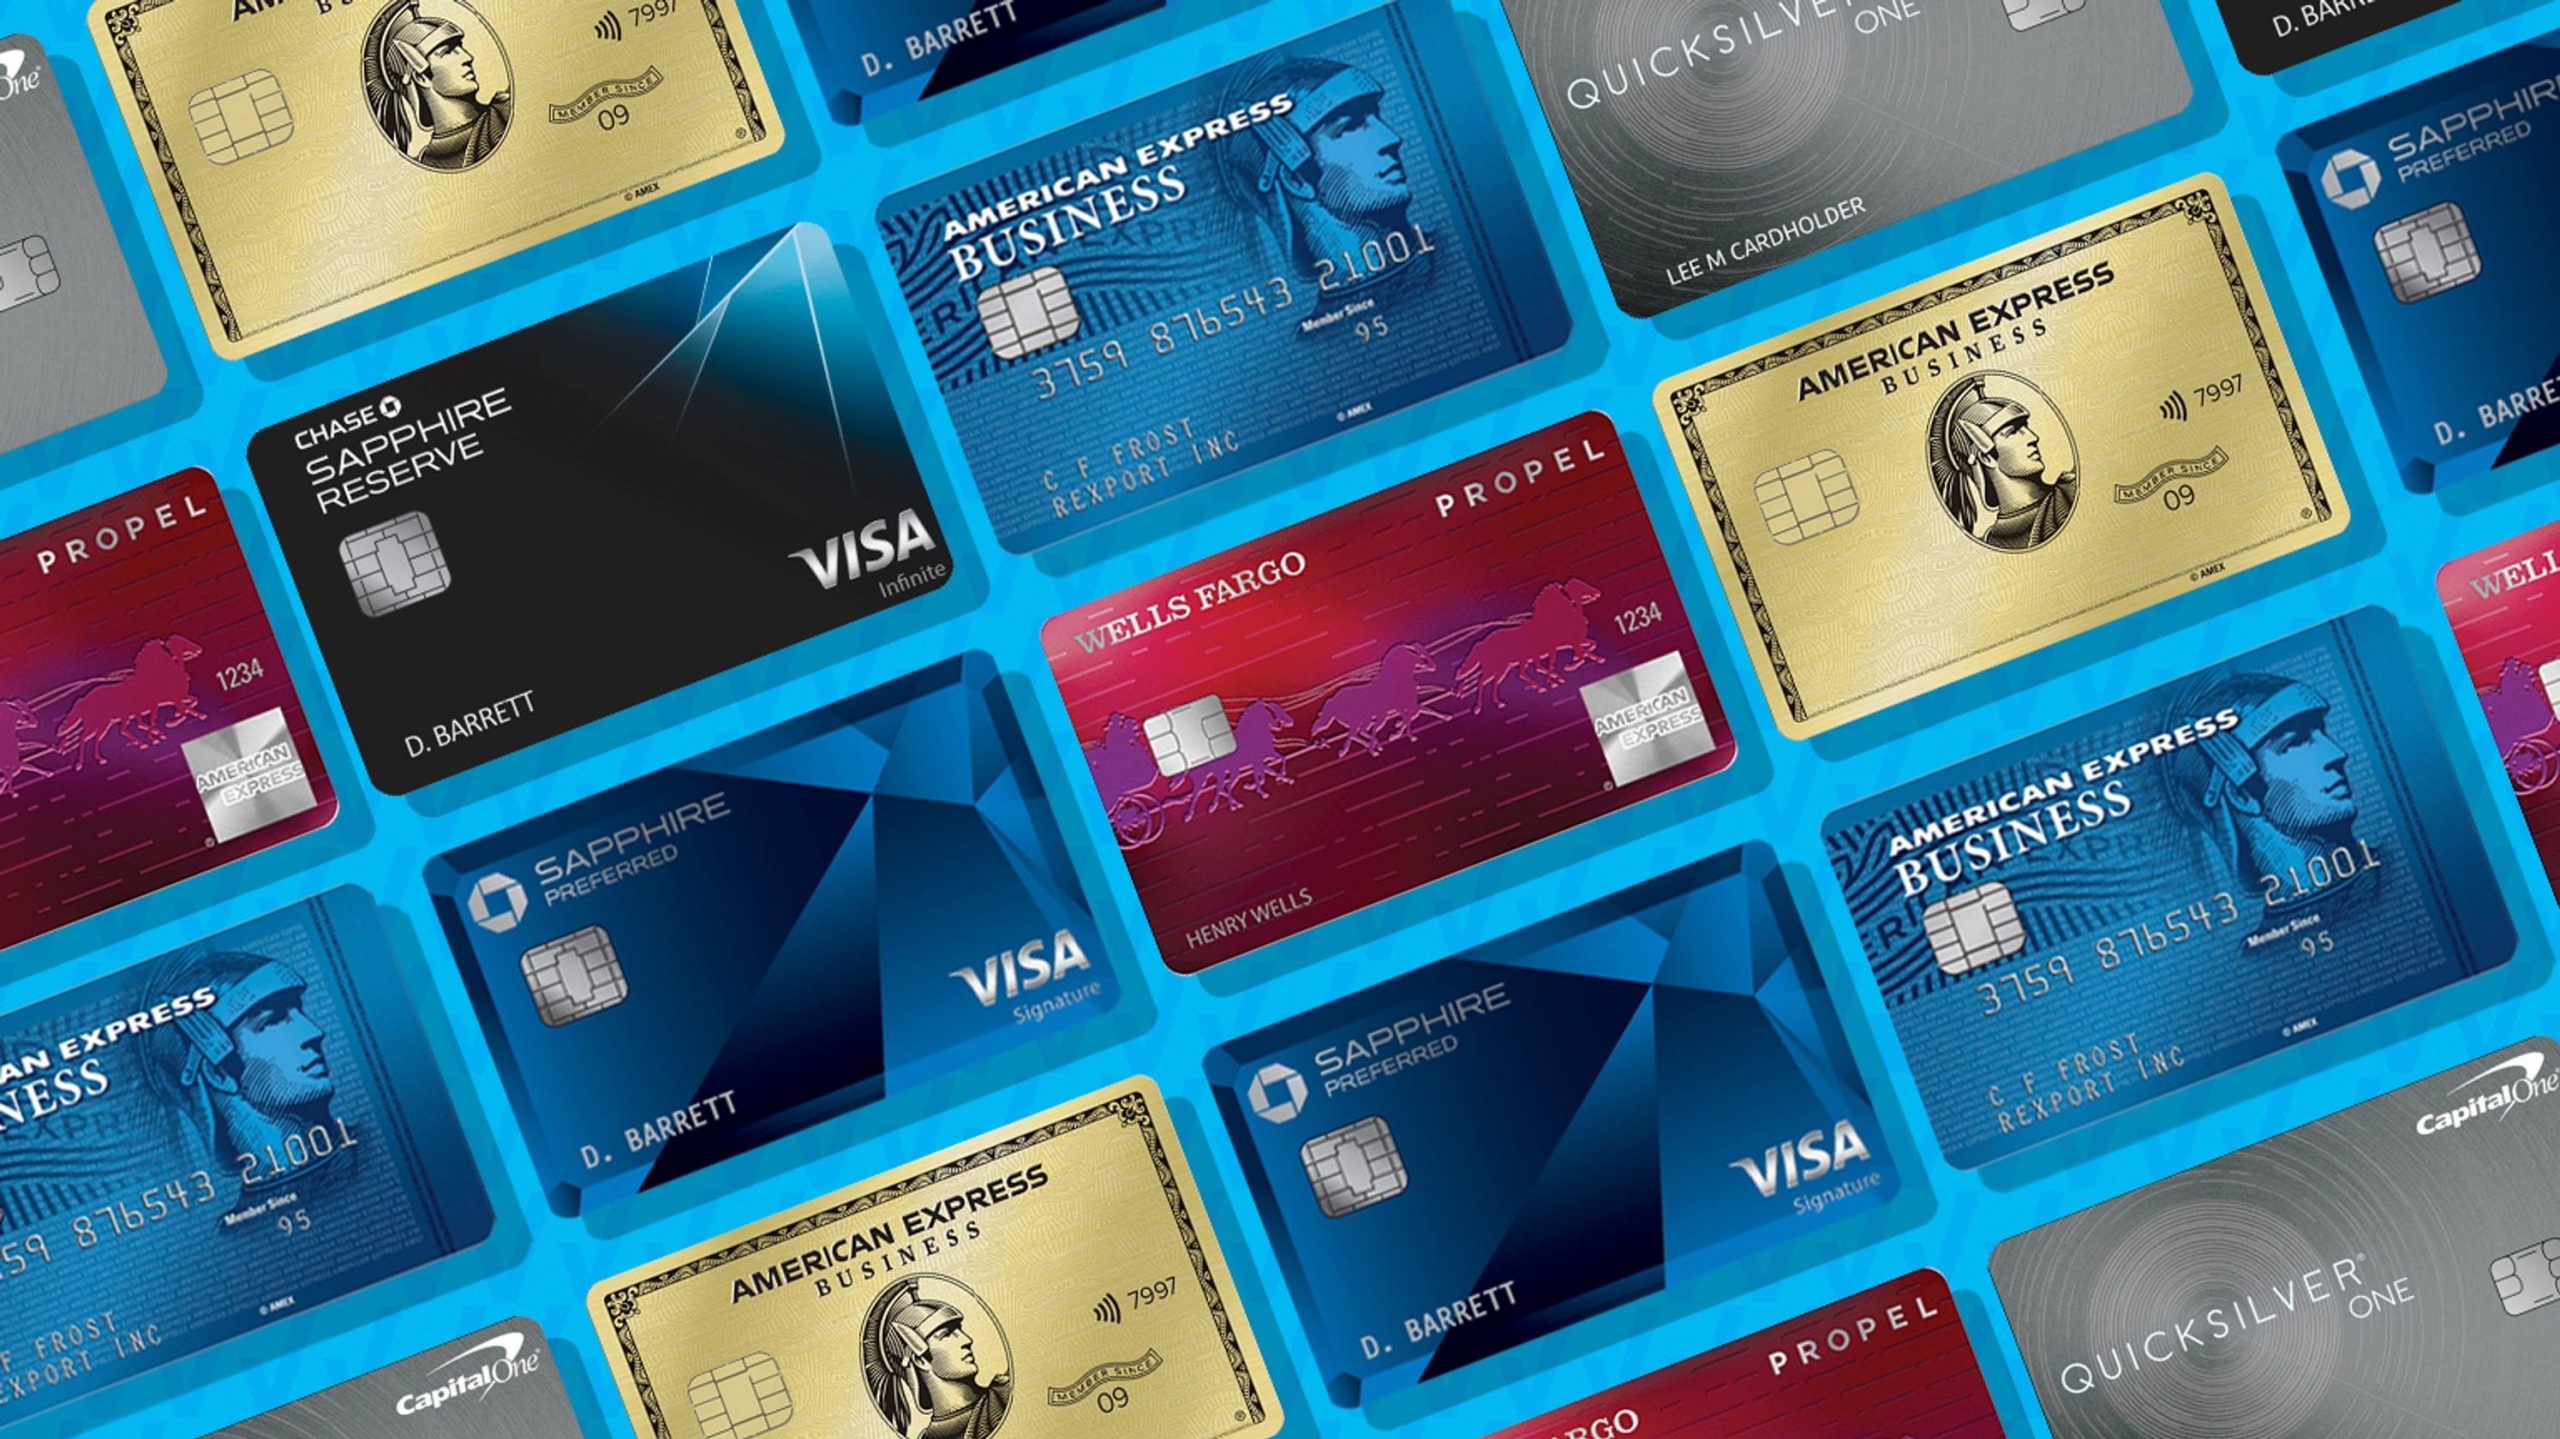 10 Best Business Credit Cards 2021 for Small Businesses Current